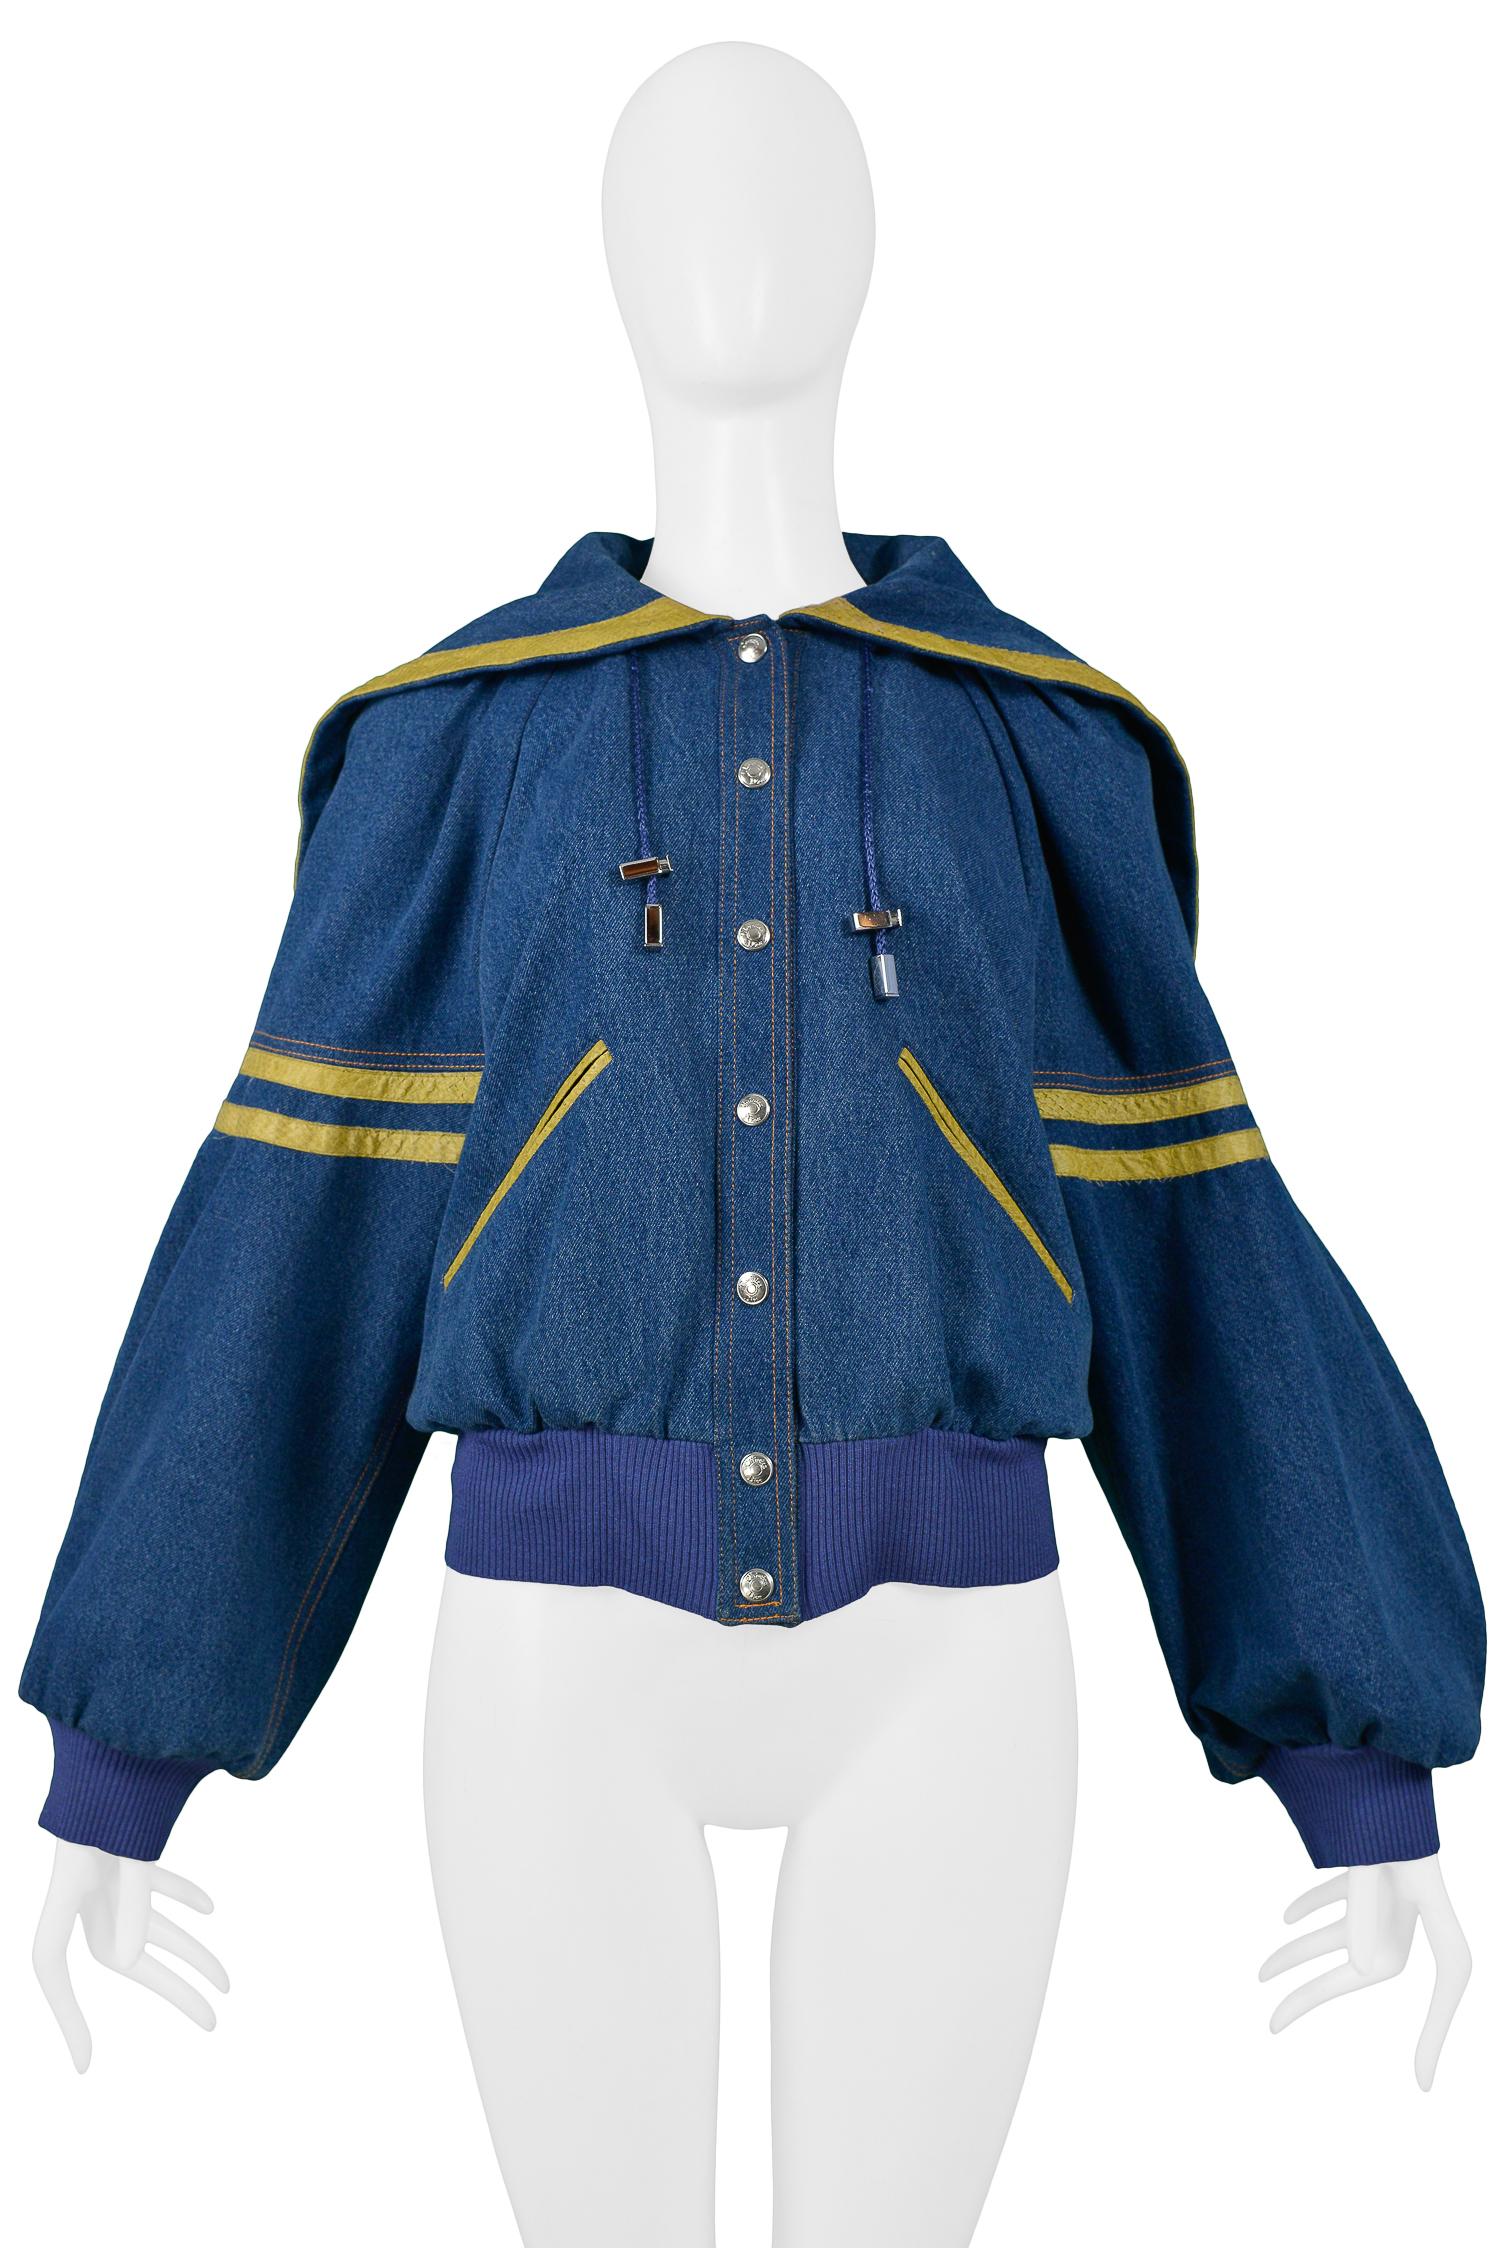 Vintage John Galliano for Christian Dior denim varsity jacket featuring ribbing at cuffs and waist, yellow salmon skin trim, front snap closure and plaid embroidered 